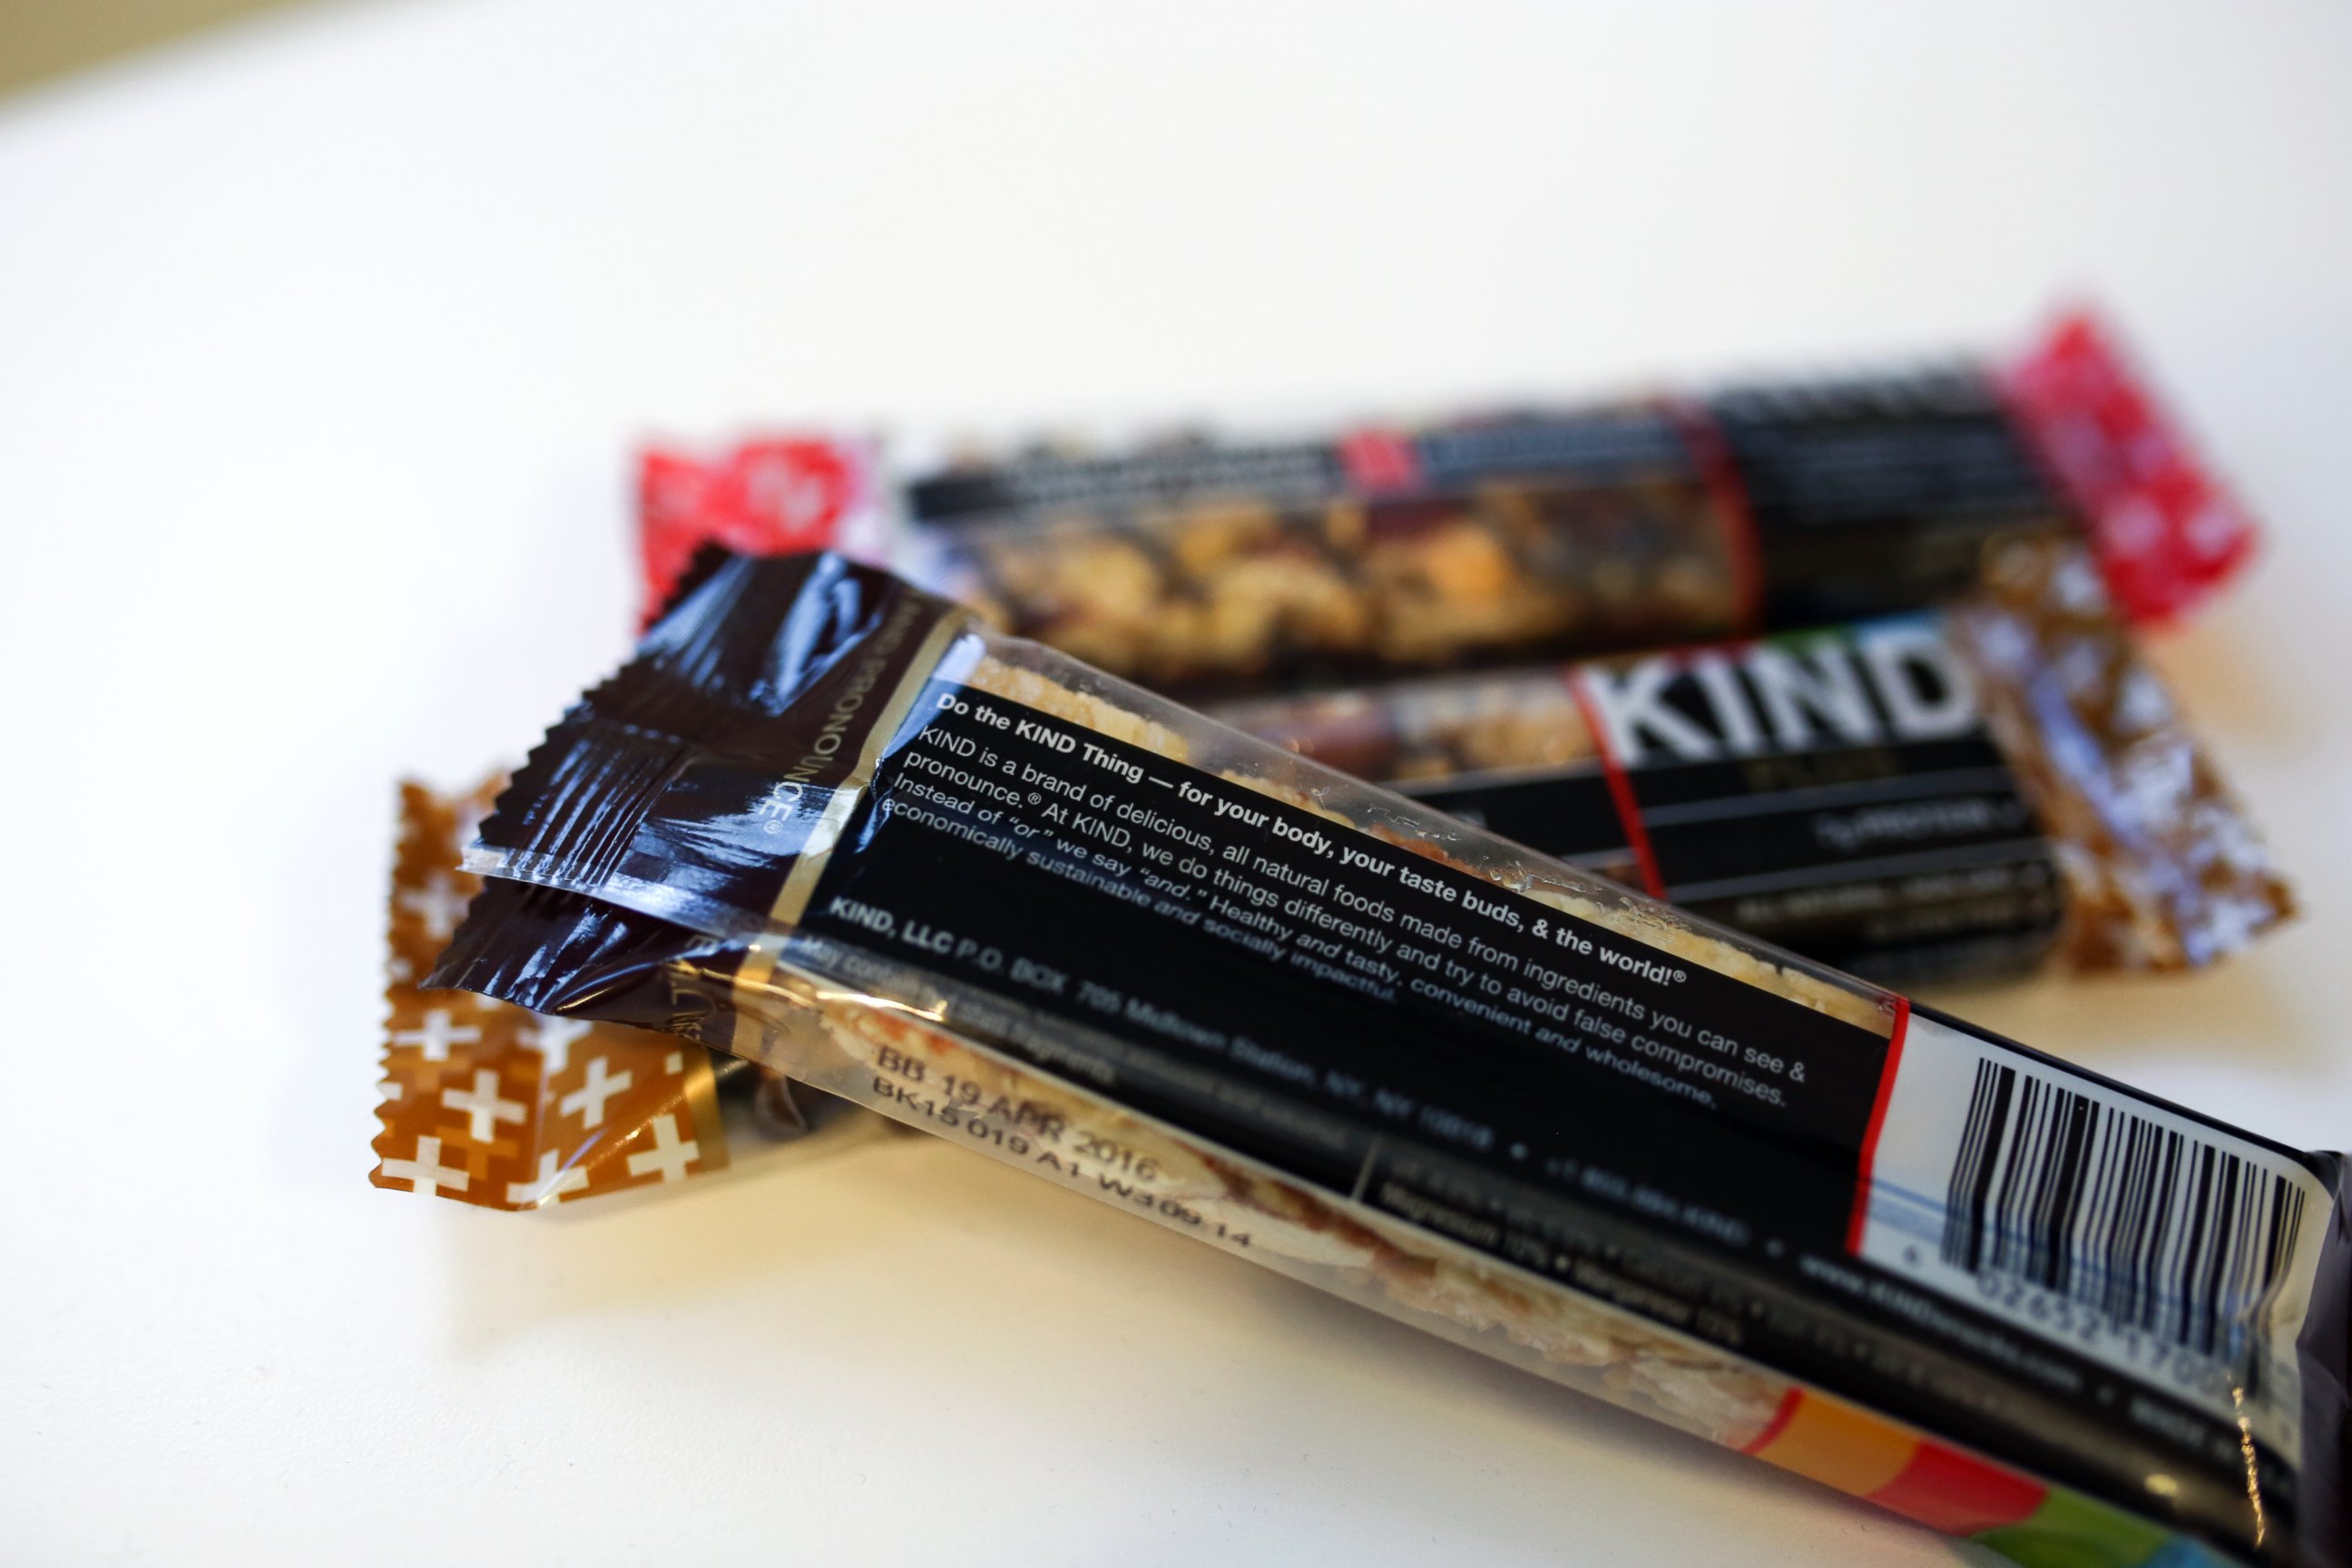 PHOTO: The FDA sent KIND Healthy Snacks a warning letter, stating that several of its bars bear labels that don't comply with FDA standards, making claims like, "healthy" "no trans fats" and "plus" without meeting the requirements to do so.